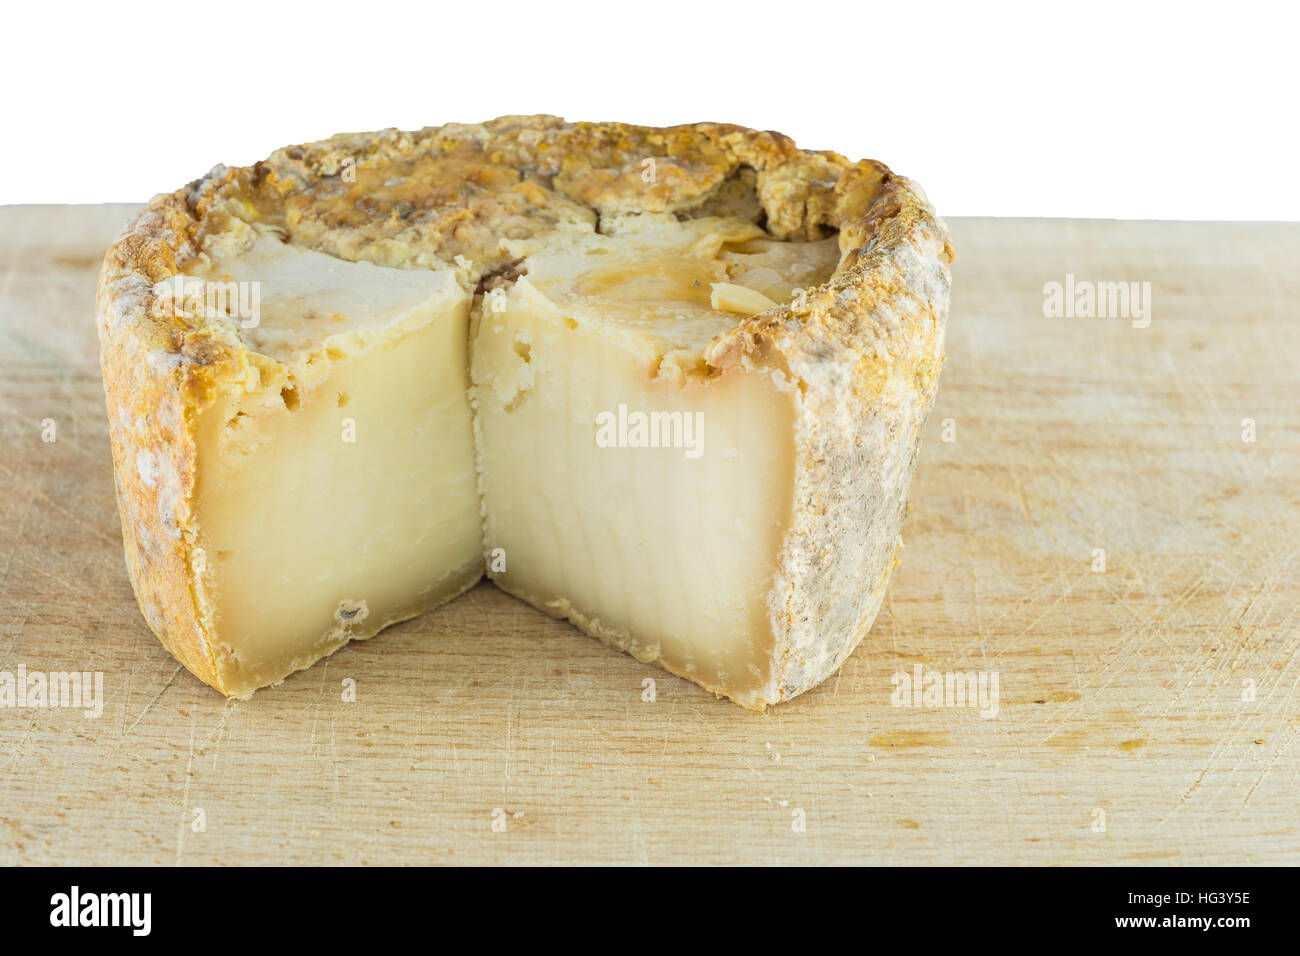 The form of hard cheese of a bloomy rind goat's milk, frost crust, treatment through special mold of the genus Penicillium, such as Penicillium camemb Stock Photo